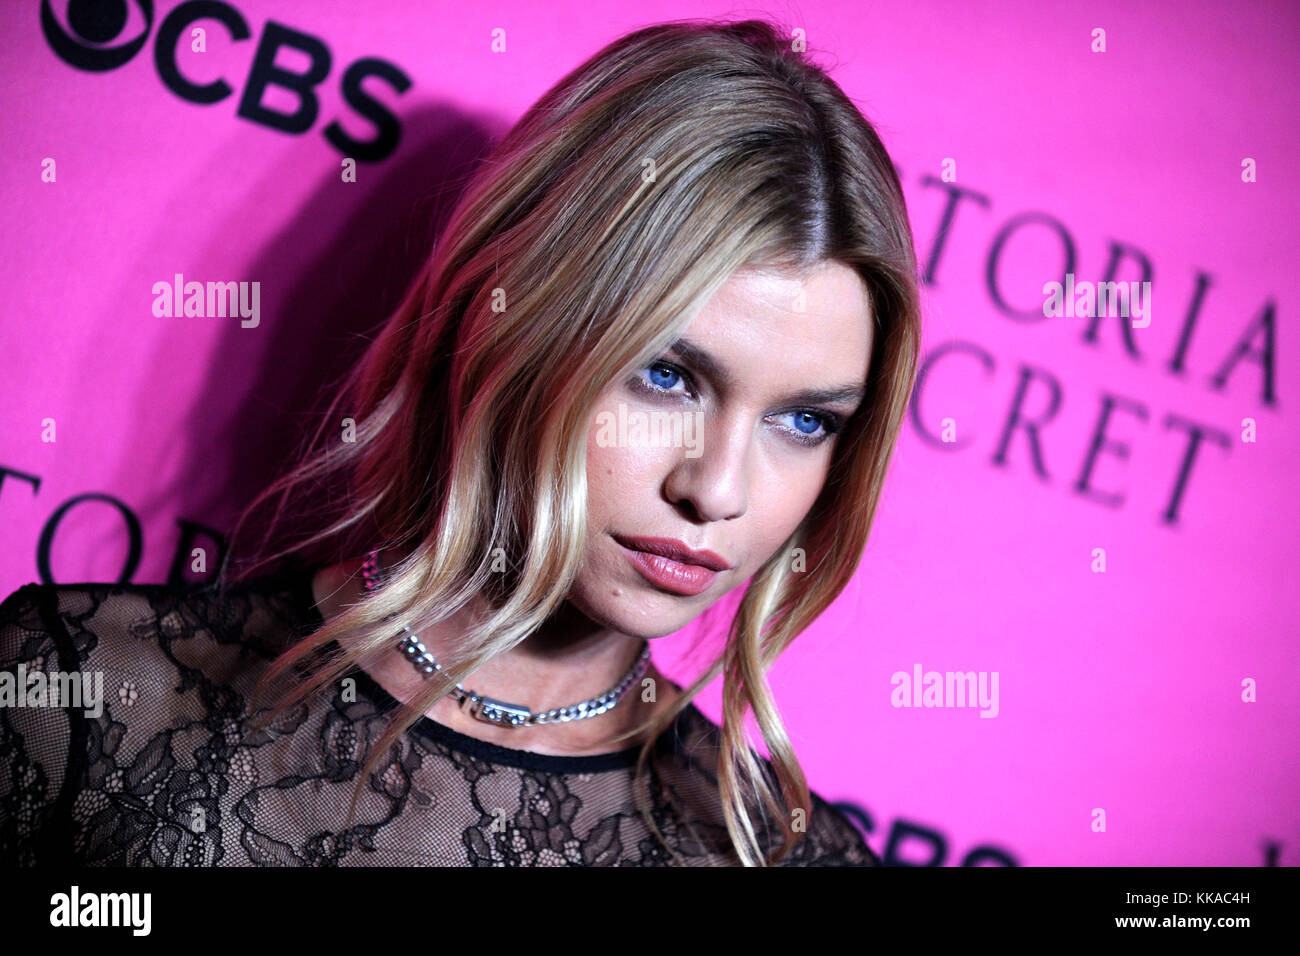 New York, USA. 28th Nov, 2017. Stella Maxwell attends the 2017 Victoria's Secret Fashion Show viewing party pink carpet at Spring Studios on November 28, 2017 in New York City. Credit: Geisler-Fotopress/Alamy Live News Stock Photo